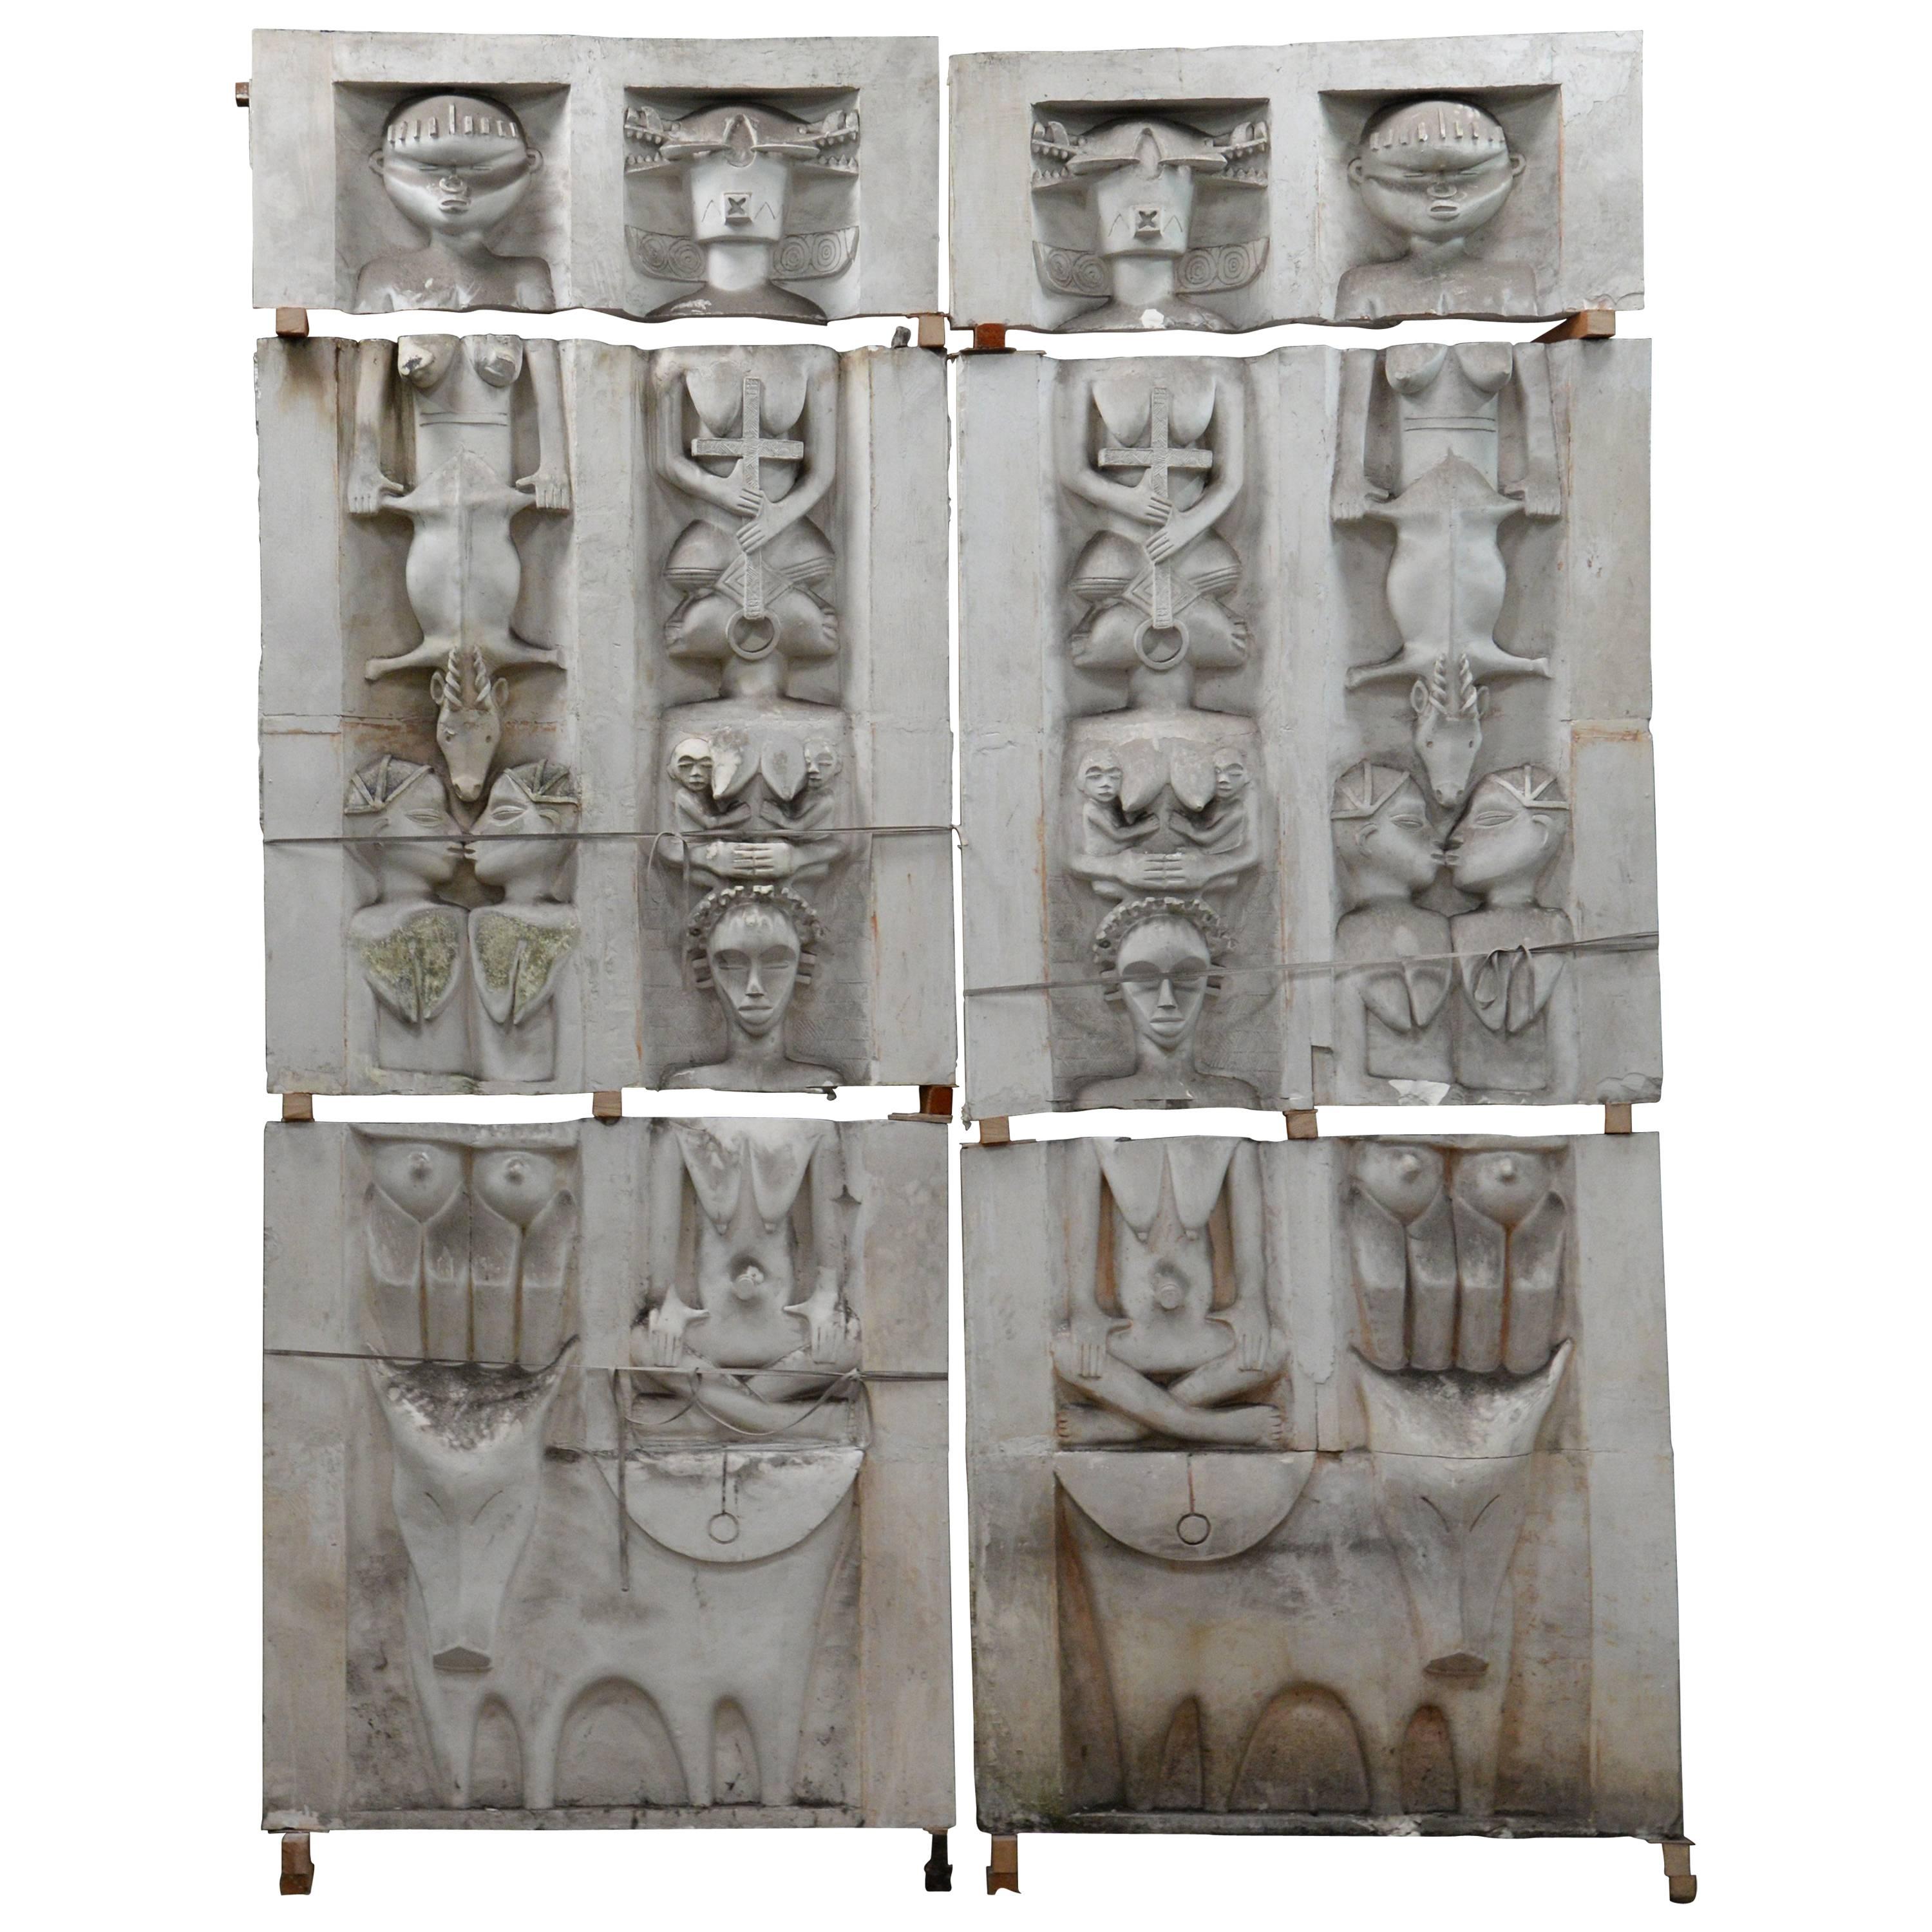 Ethnic Style Monumental Decorative Elements in Plaster, 20th Century For Sale